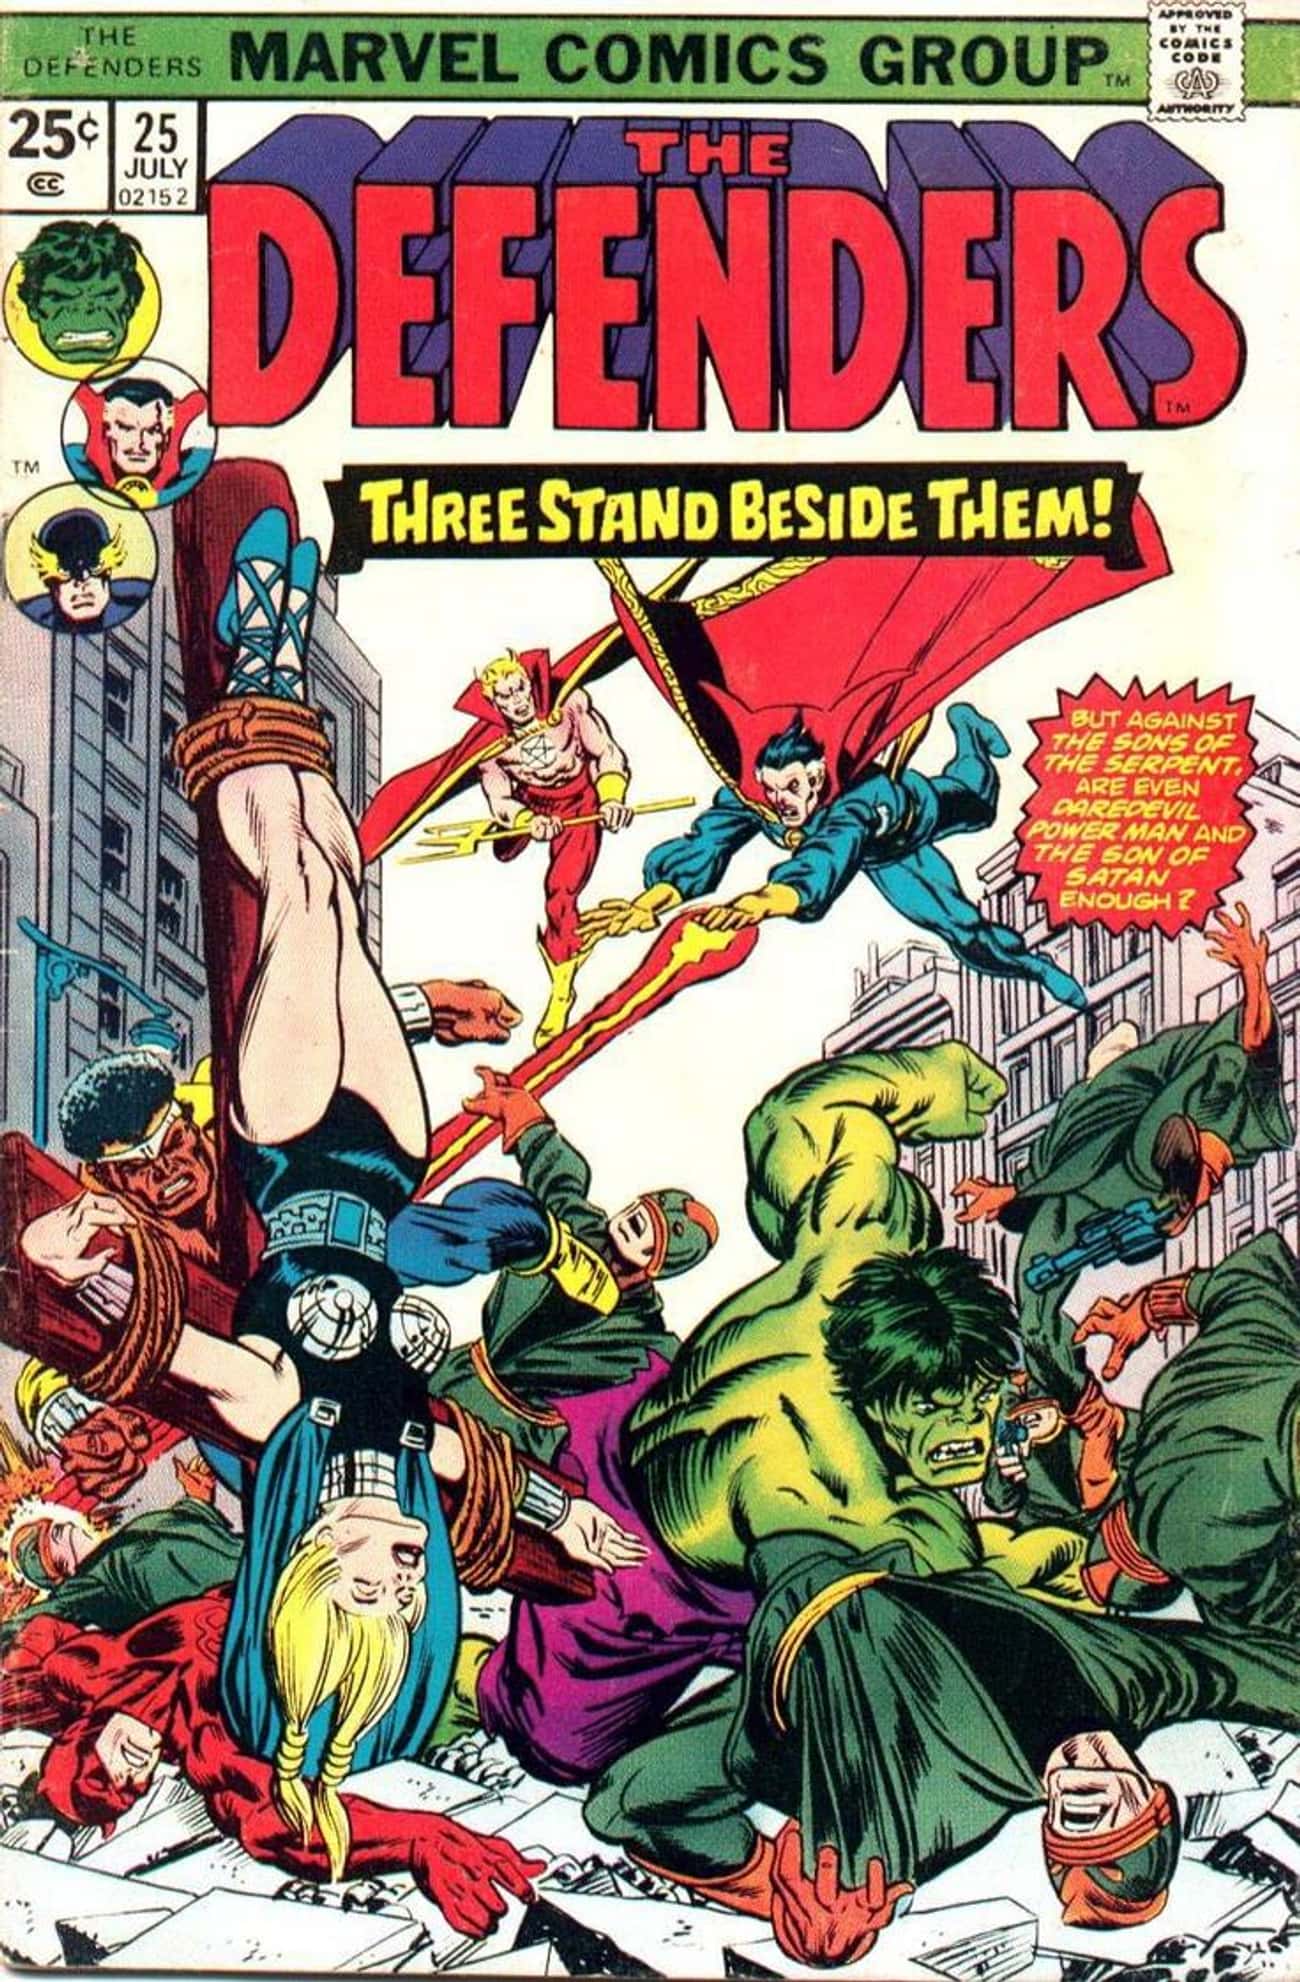 The Defenders (in the Comics) Were the More Mythical and Supernatural Side of The Avengers